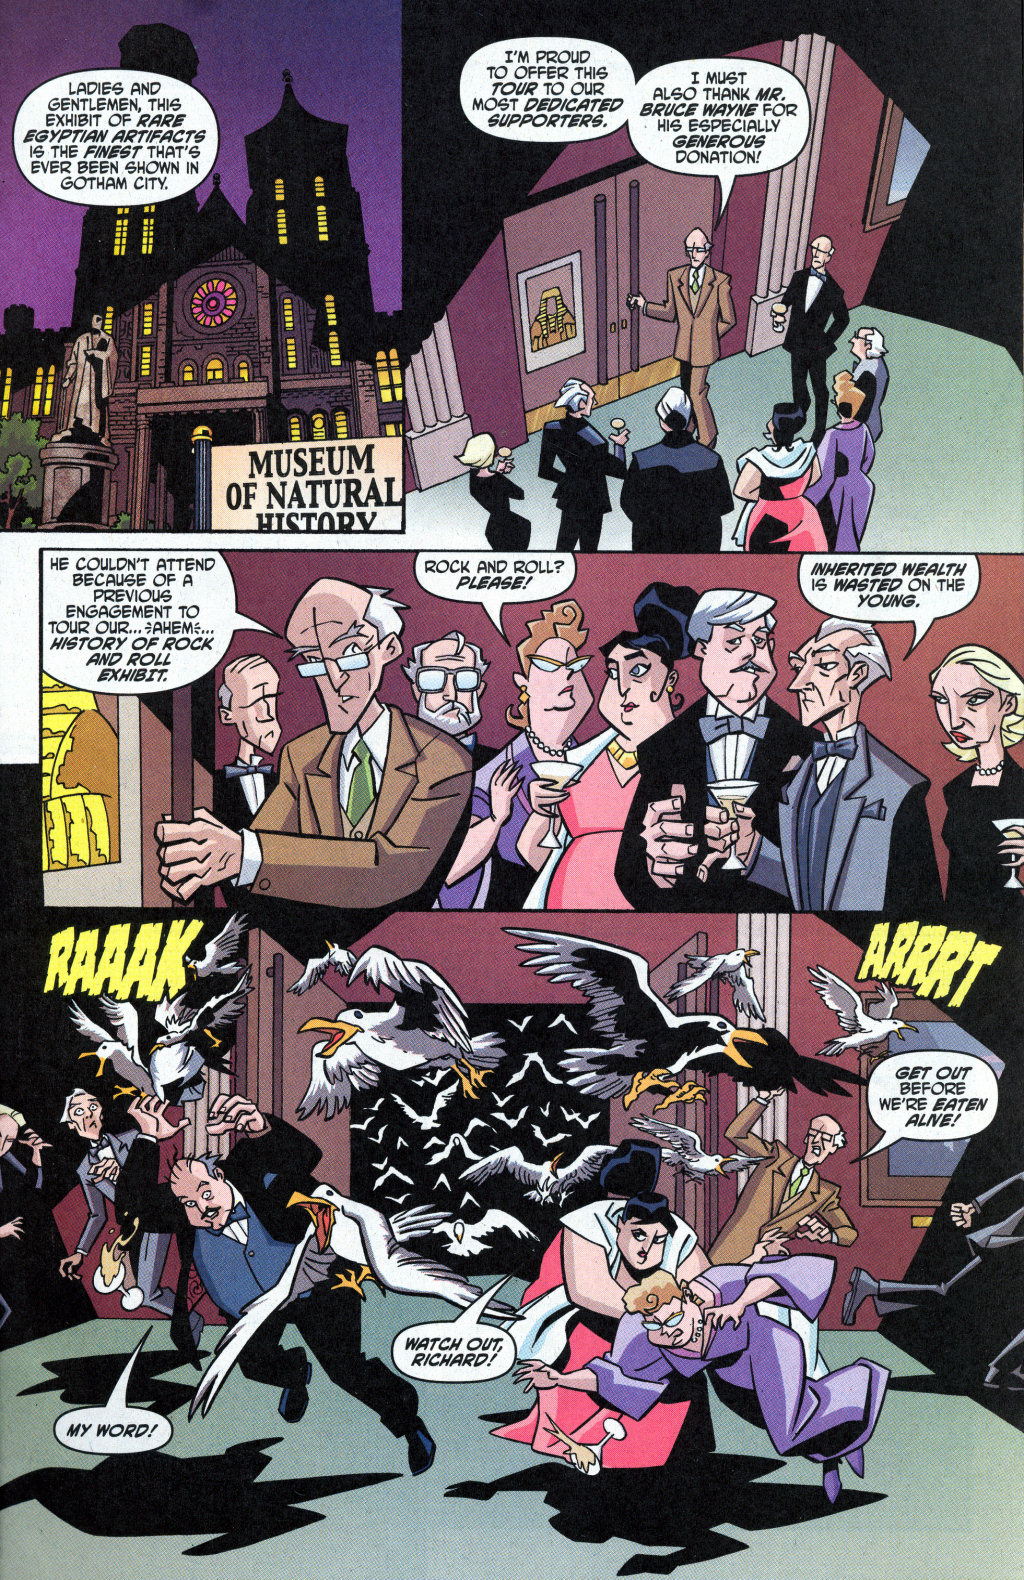 The Batman Strikes! issue 1 (Burger King Giveaway Edition) - Page 5